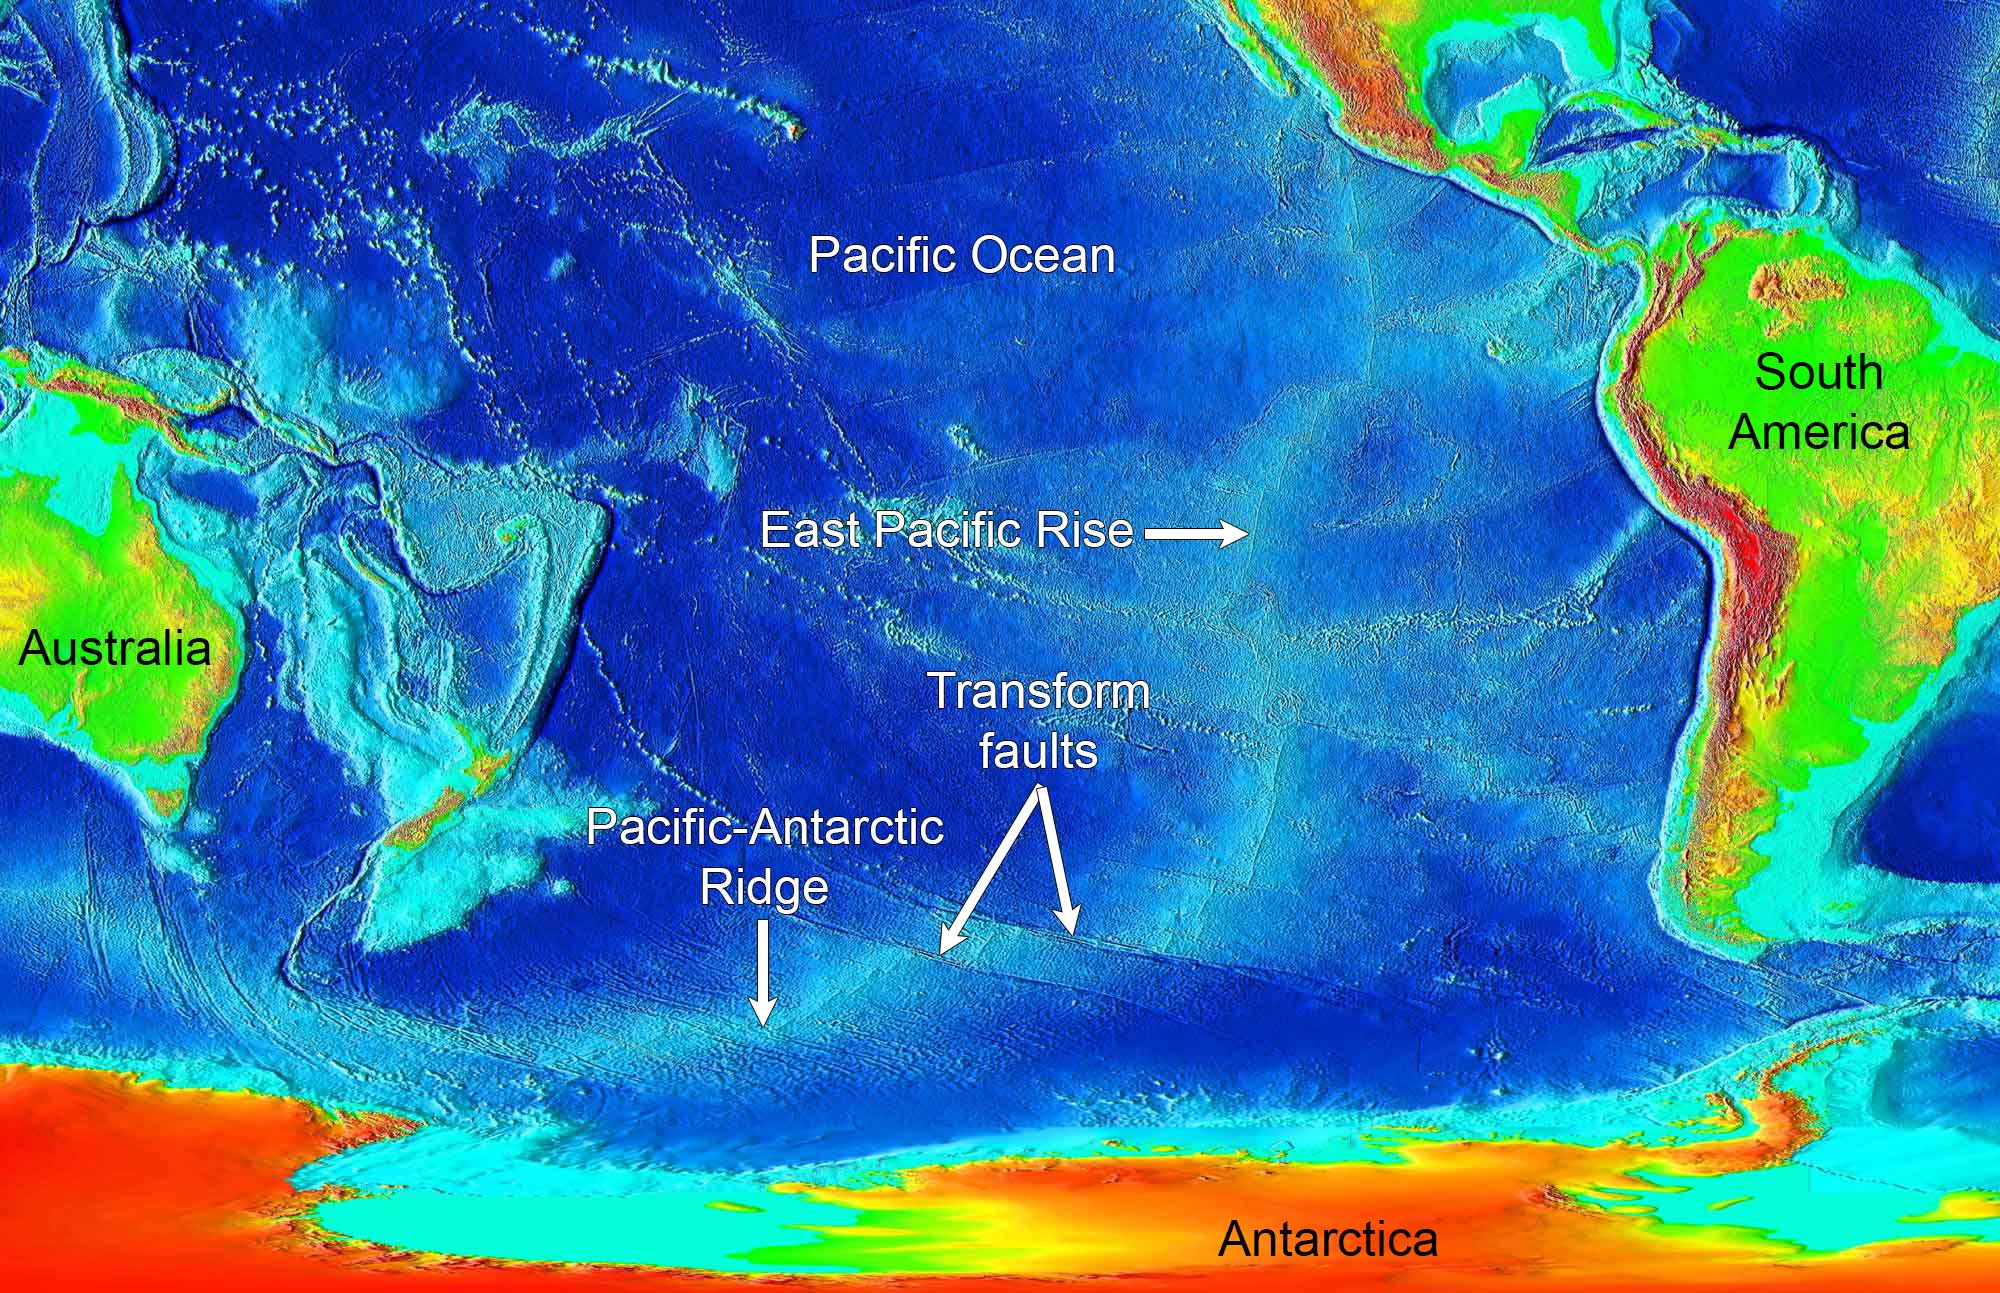 Relief map of the southern Pacific Ocean showing the East Pacific Rise to the west of South America and the contiguous Pacific-Antarctic Ridge paralleling Antarctica. These spreading centers are made up of diverging and transform boundaries, giving them a stair-step appearance.